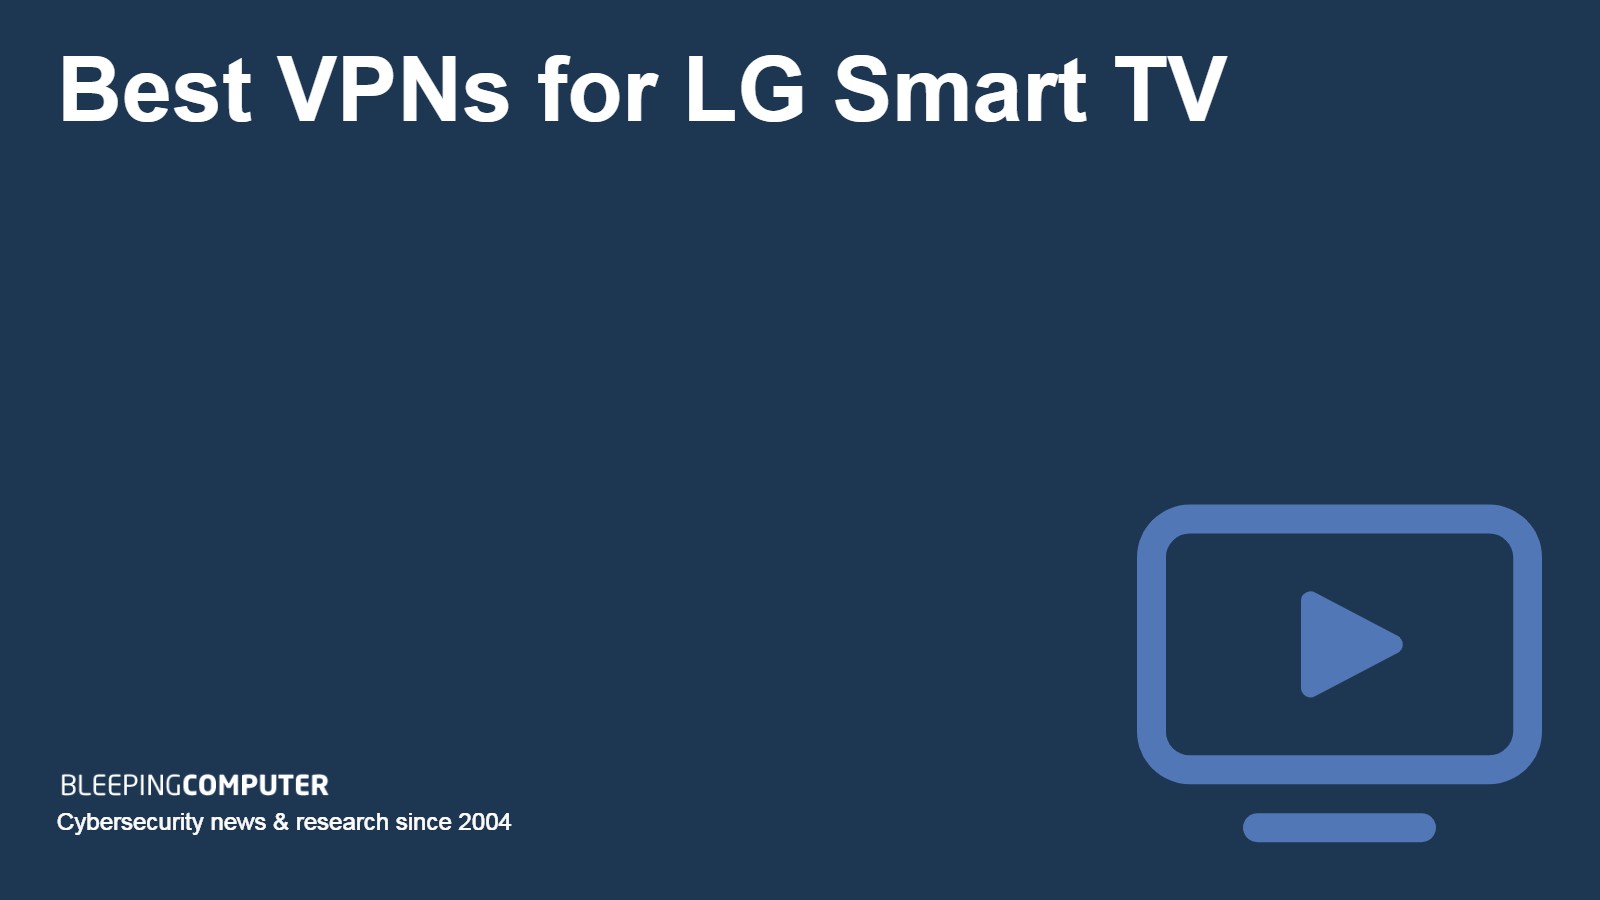 How To Watch HBO Max On Your LG Smart TV Without App